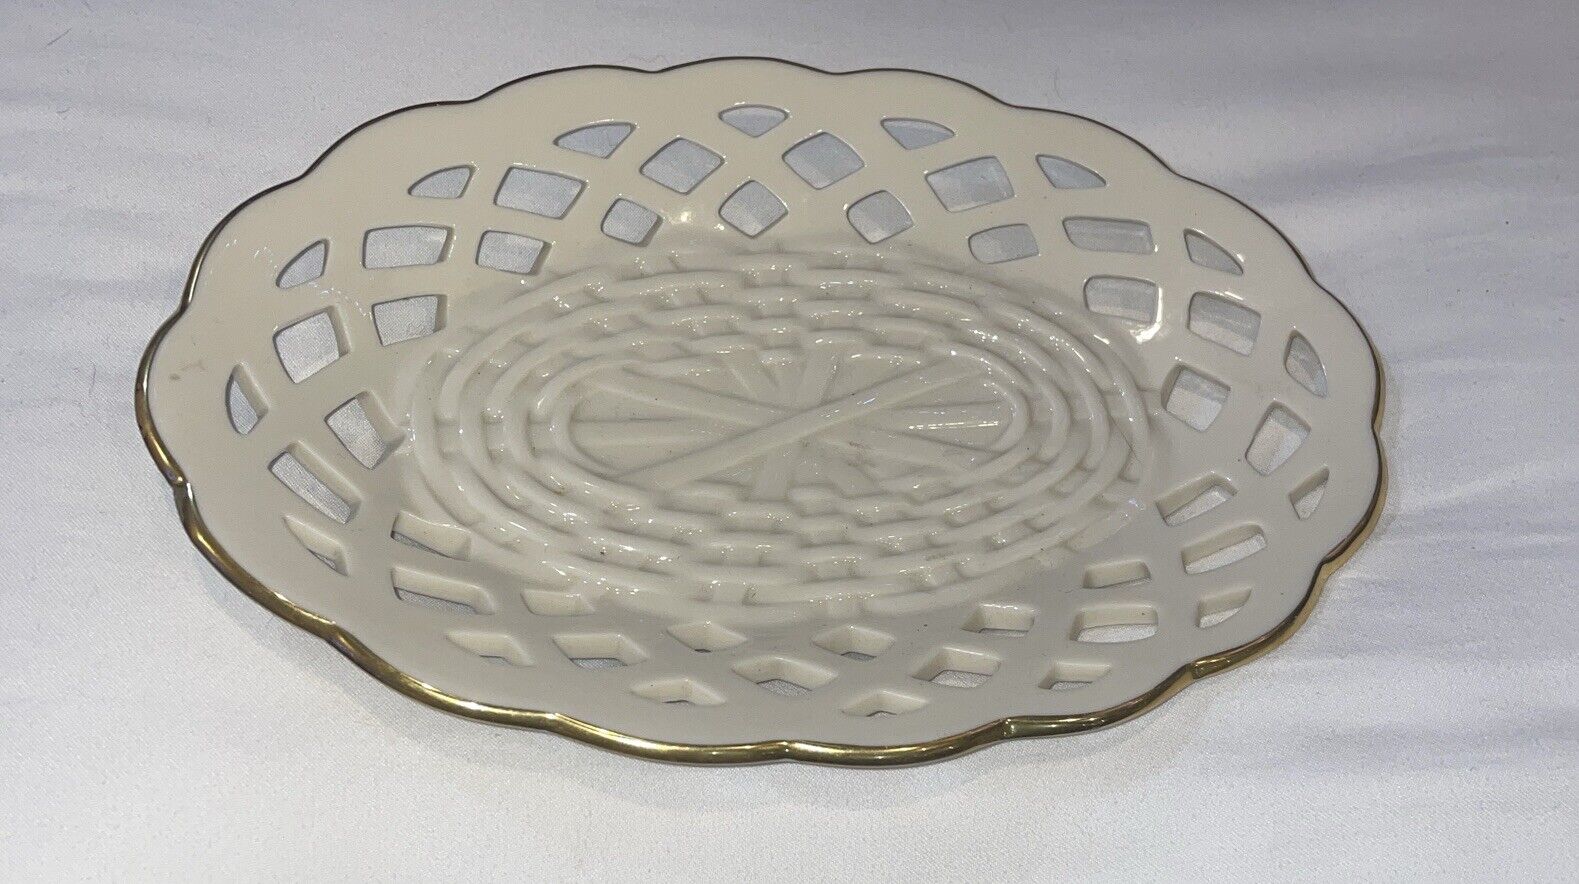 Lenox Wicker Collection Pierced Candy Server Dish with Gold Trim